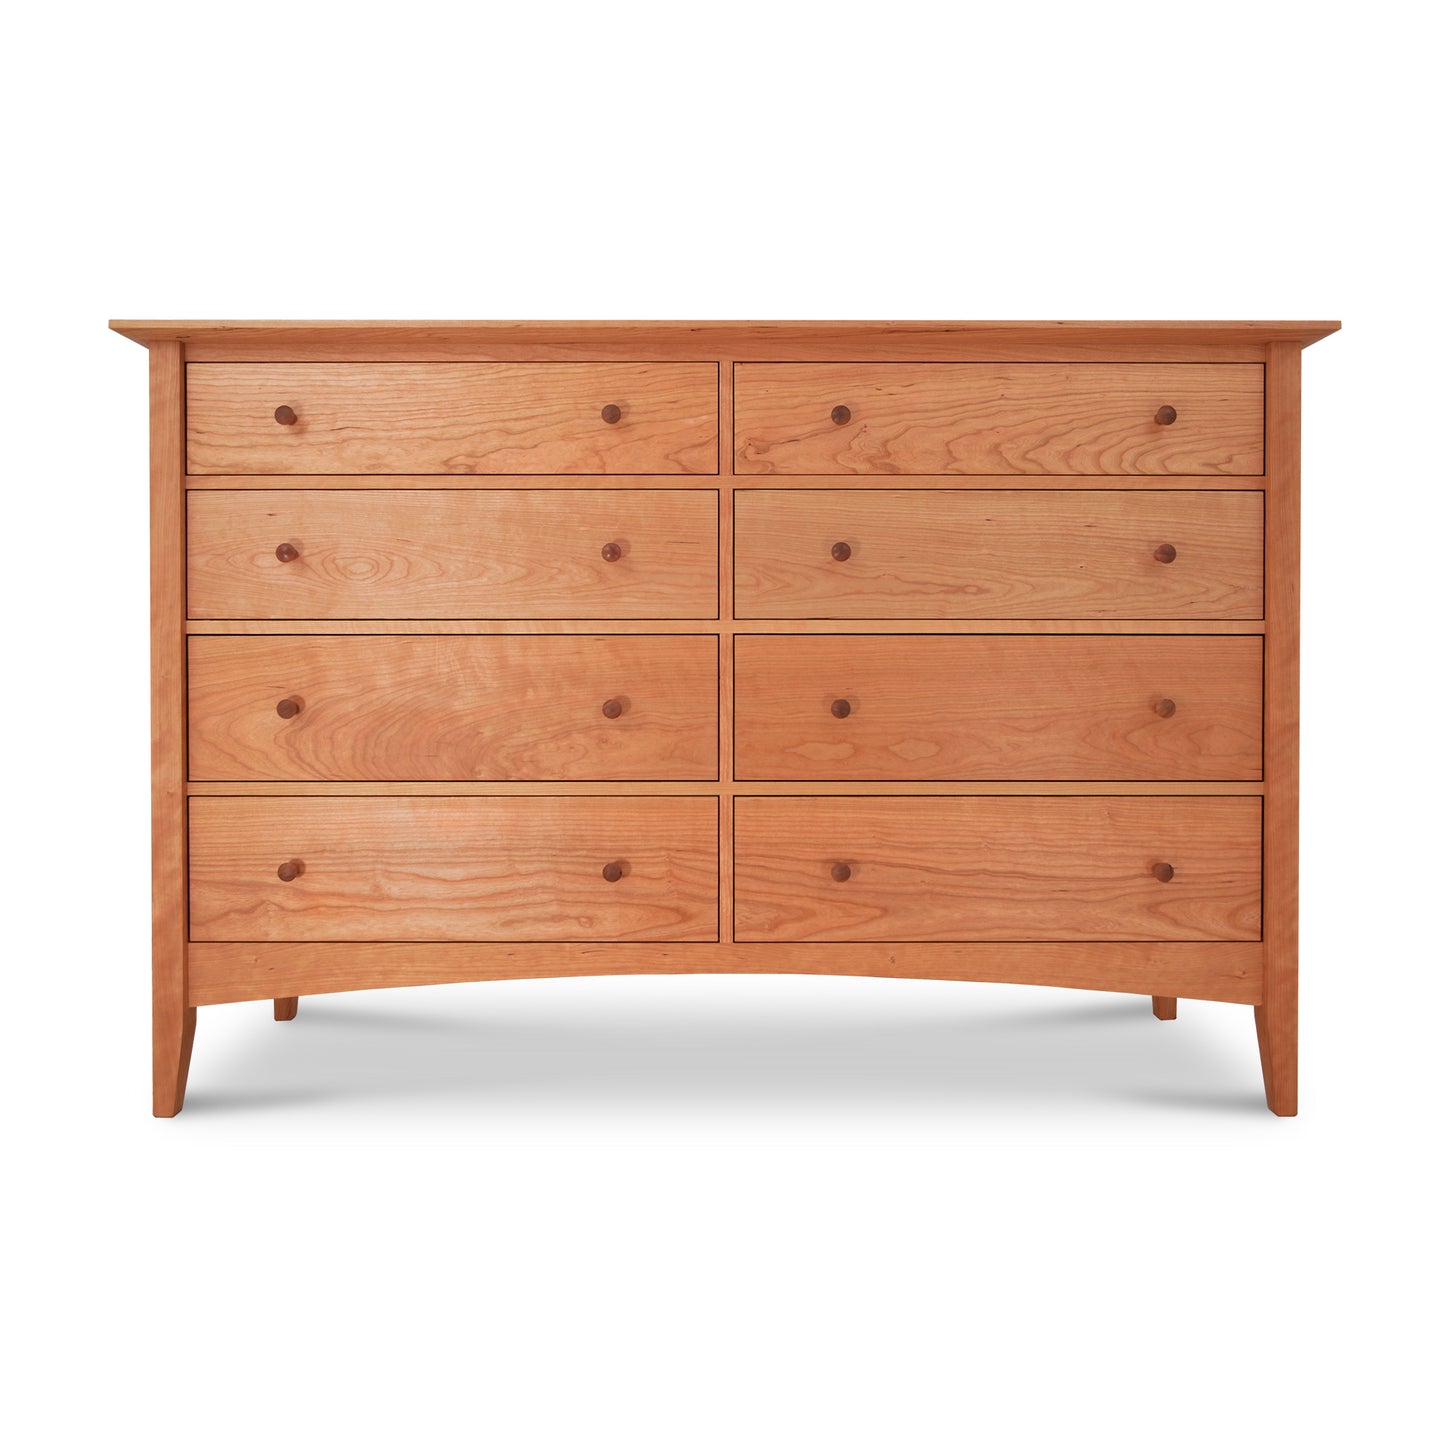 A Maple Corner Woodworks American Shaker 8-Drawer Dresser with drawers on a white background, perfect for your bedroom furniture needs.